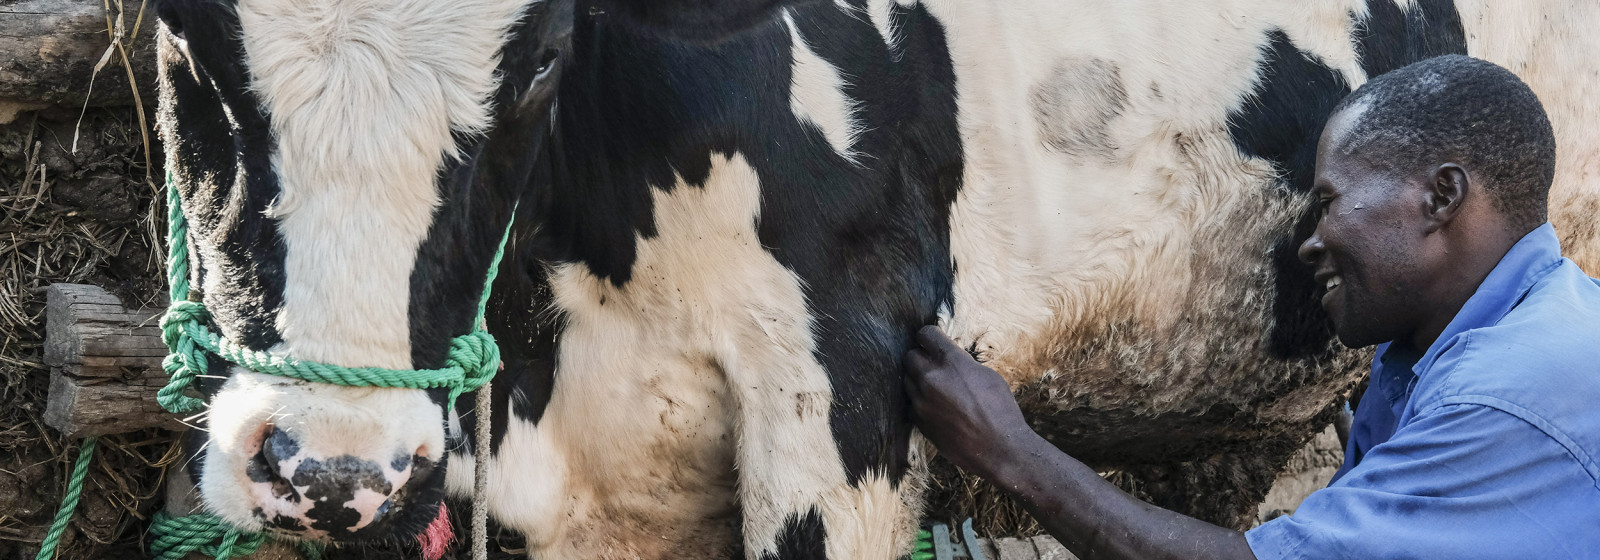 Upgrading Tanzania's dairy value chain to unlock its productivity potential  | CGIAR Research Program on Livestock